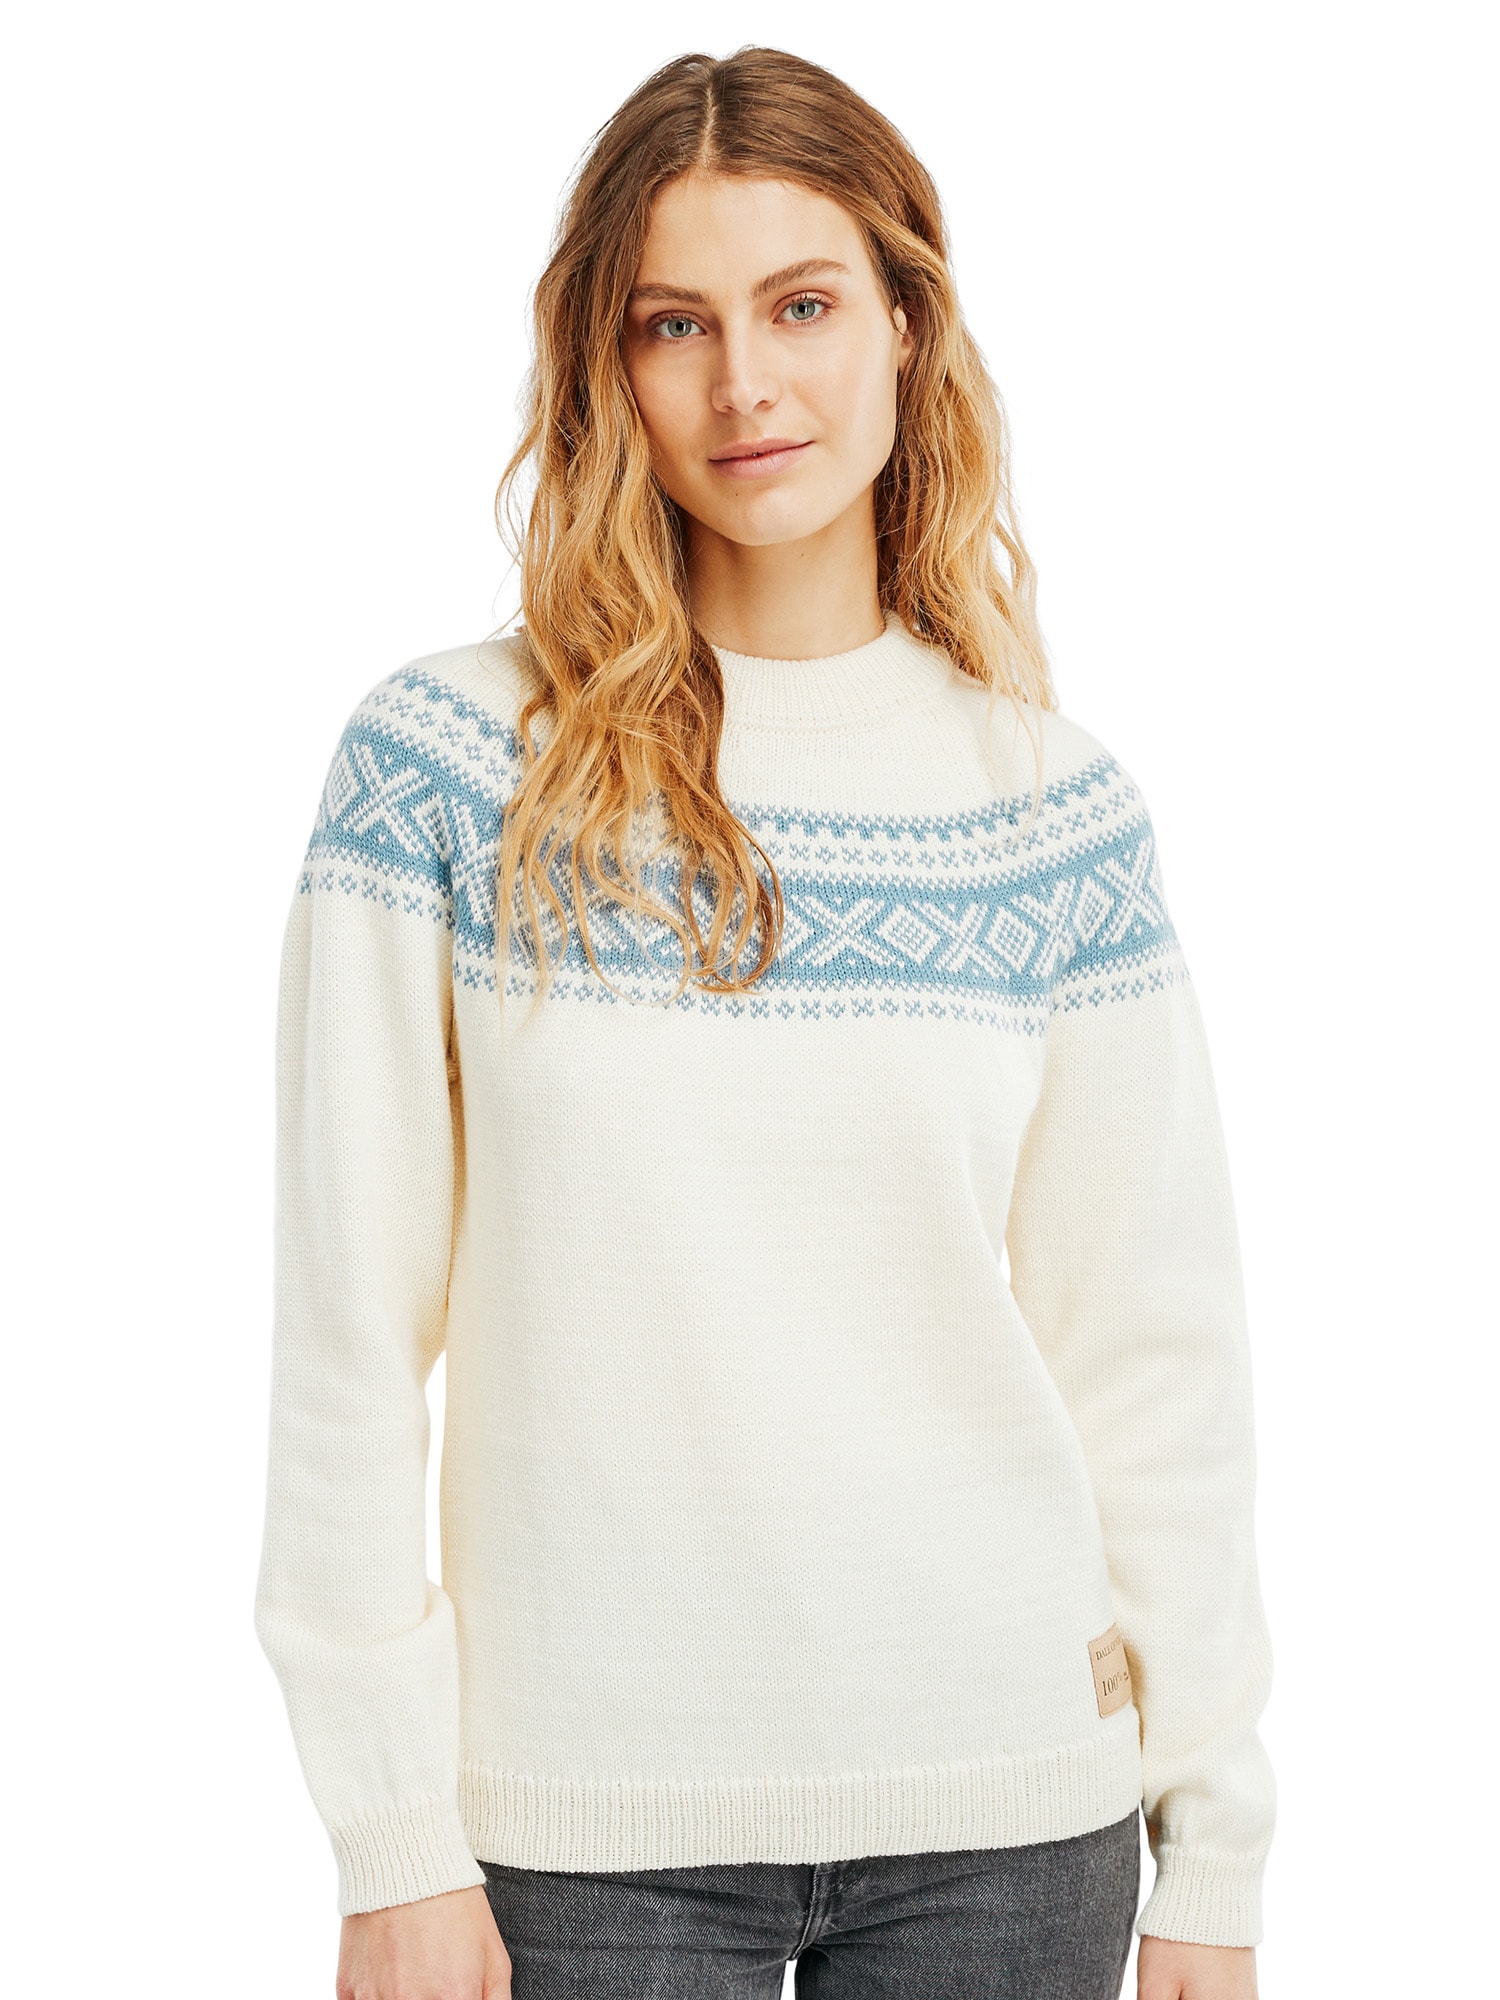 Vågsøy sweater - Women - Offwhite - Dale of Norway - Dale of Norway